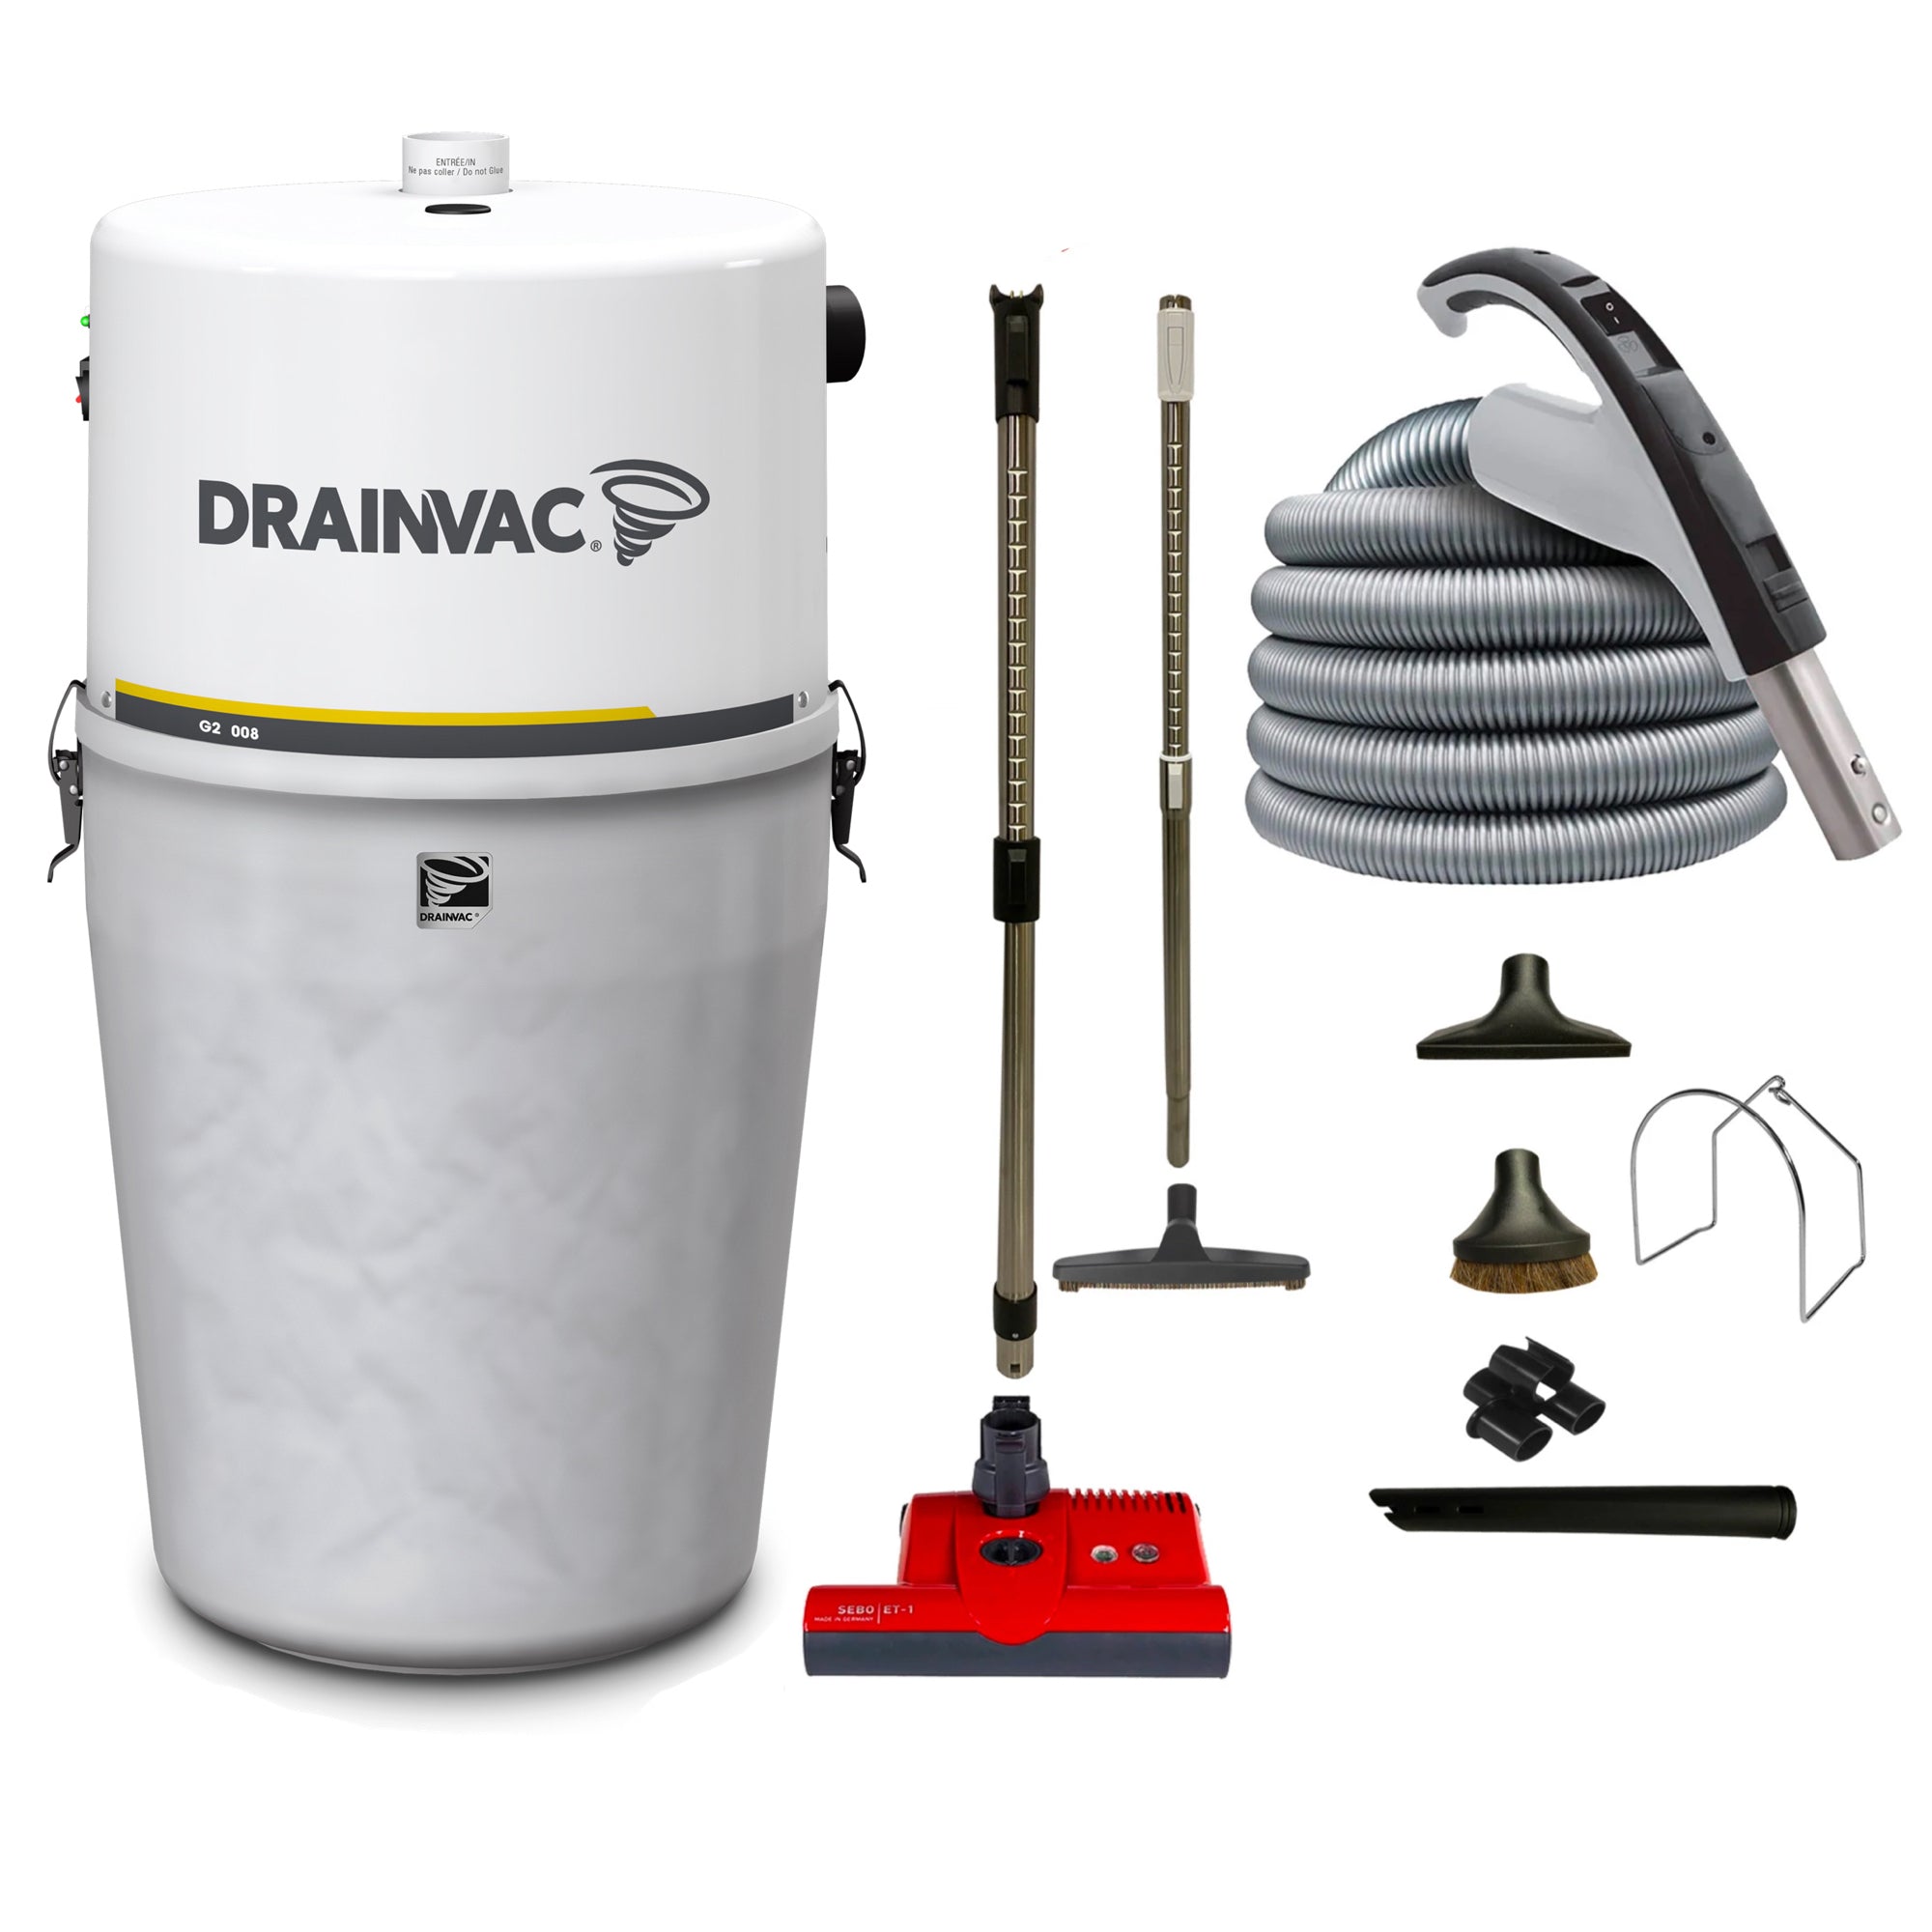 DrainVac G2-008 Central Vacuum with SEBO ET-1 Electric Package